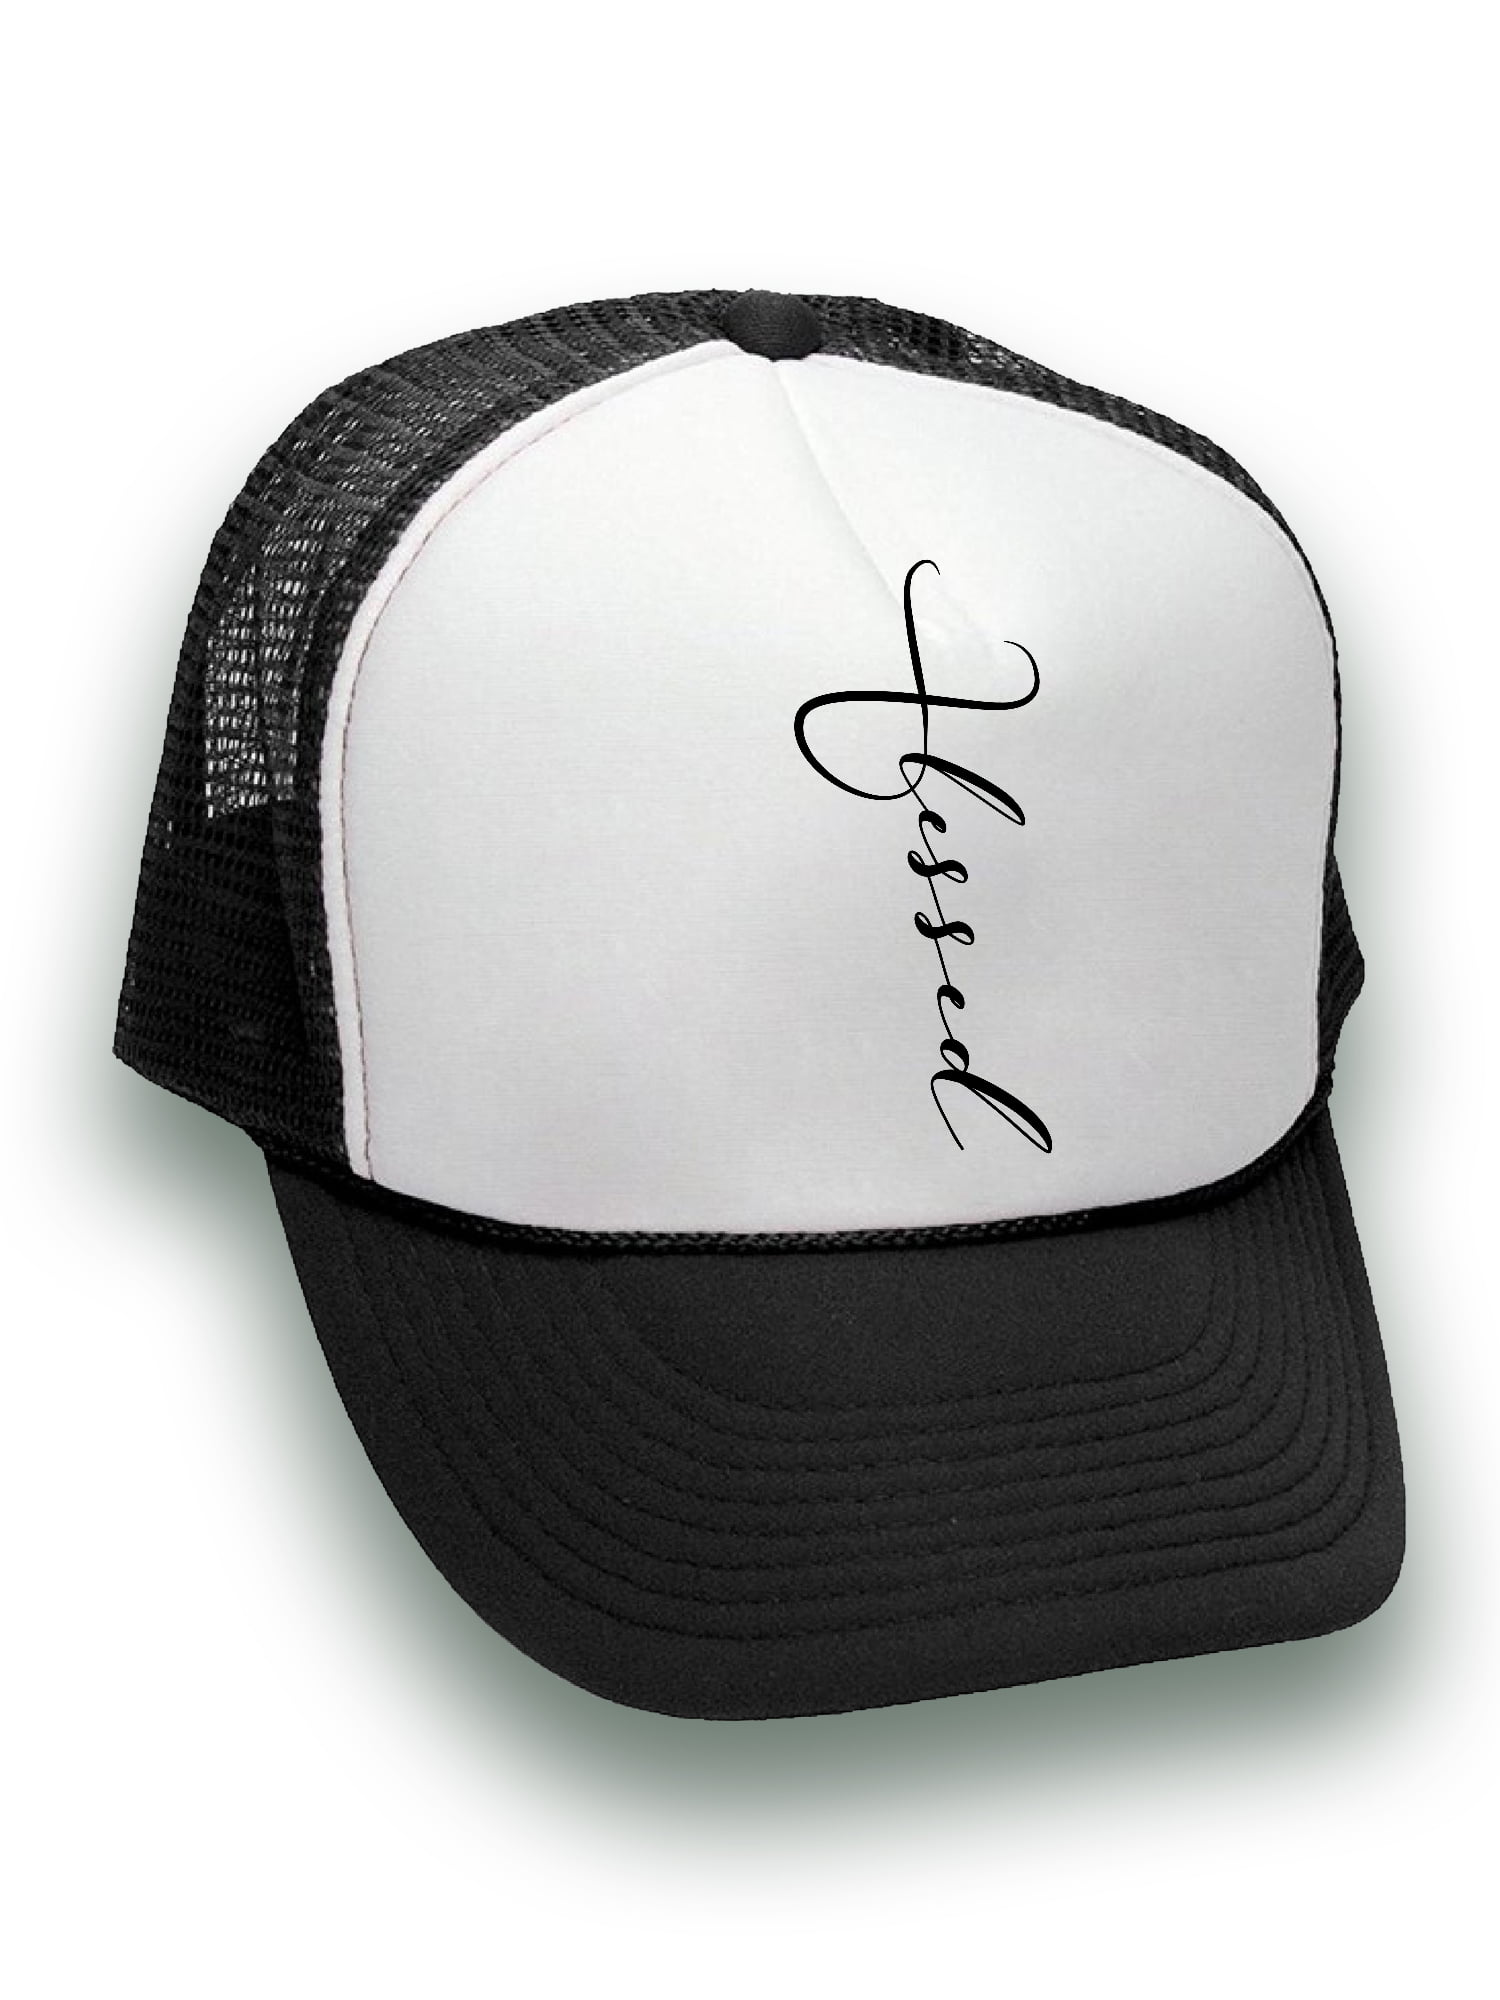 Cross Faith Blessed Jesus Adjustable Sports Hats Sun Hat for Men and Women